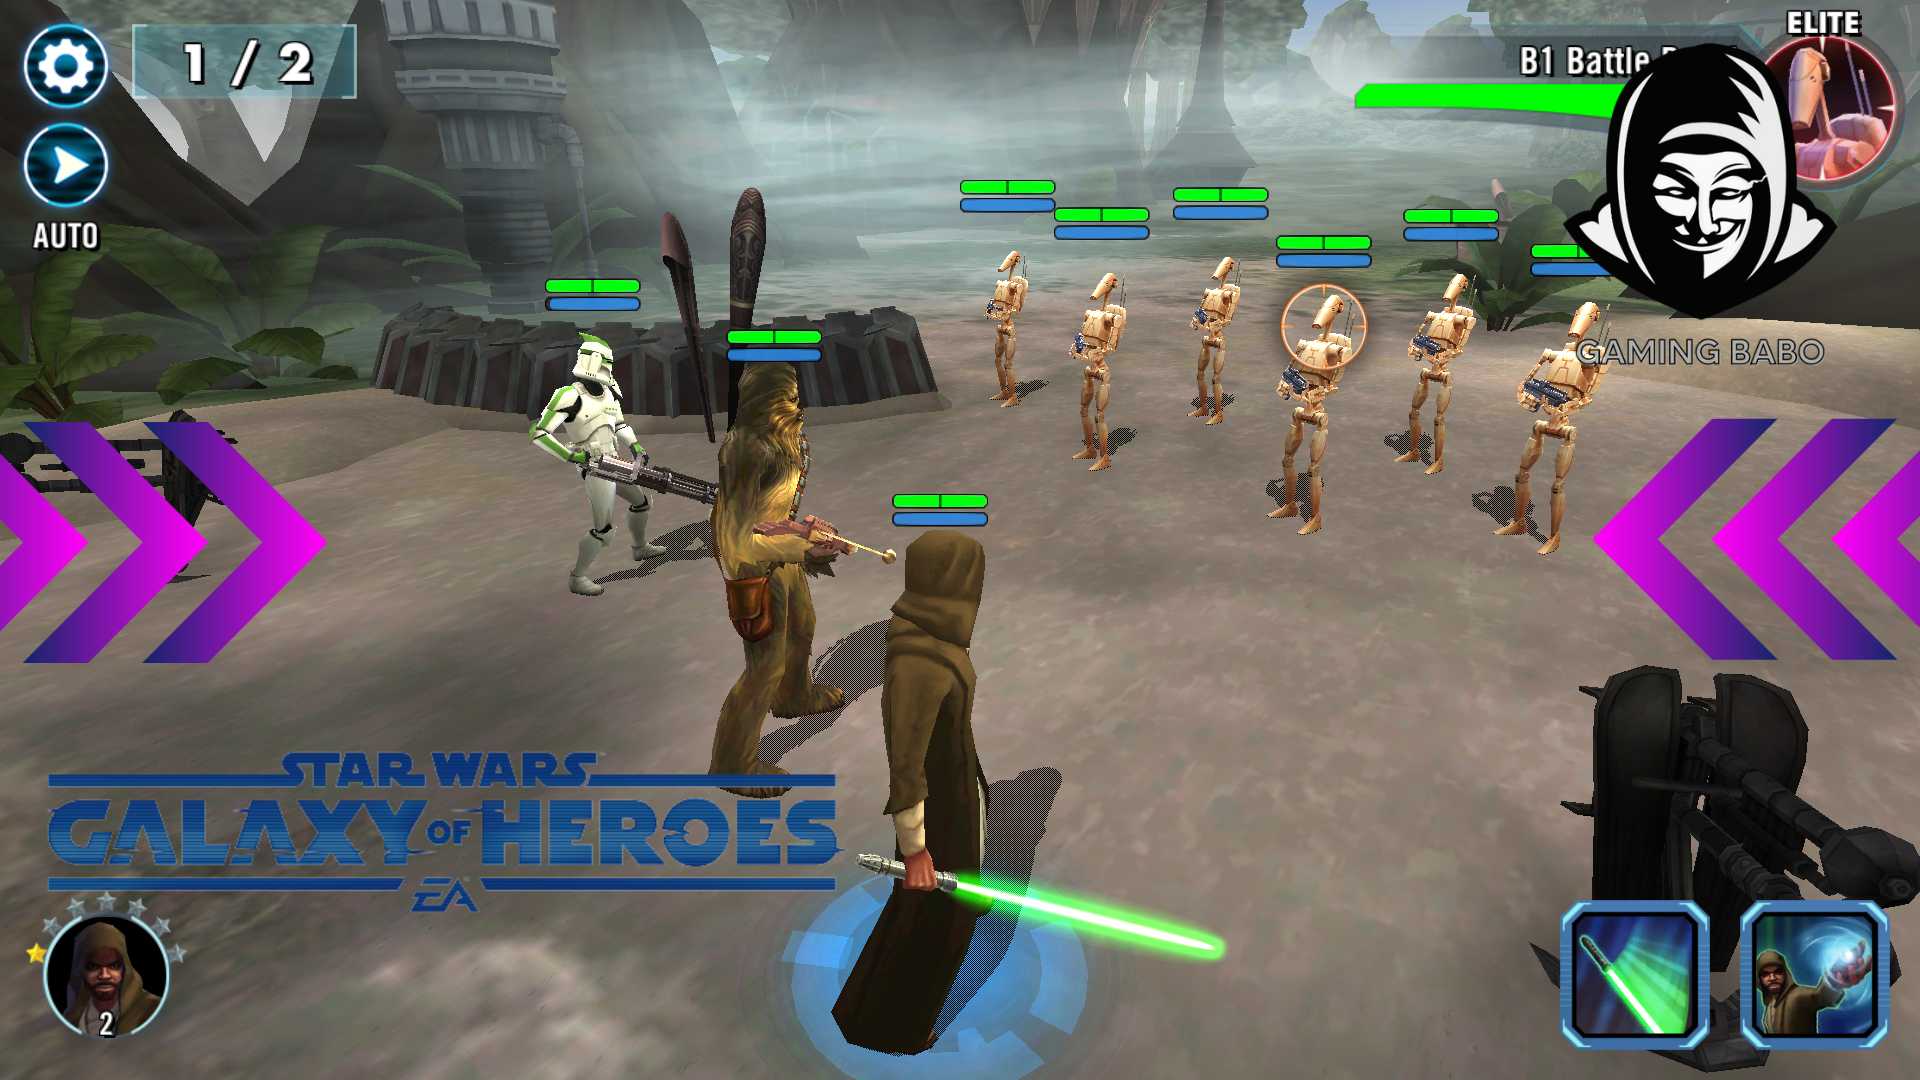 Star Wars Galaxy of Heroes tips and tricks